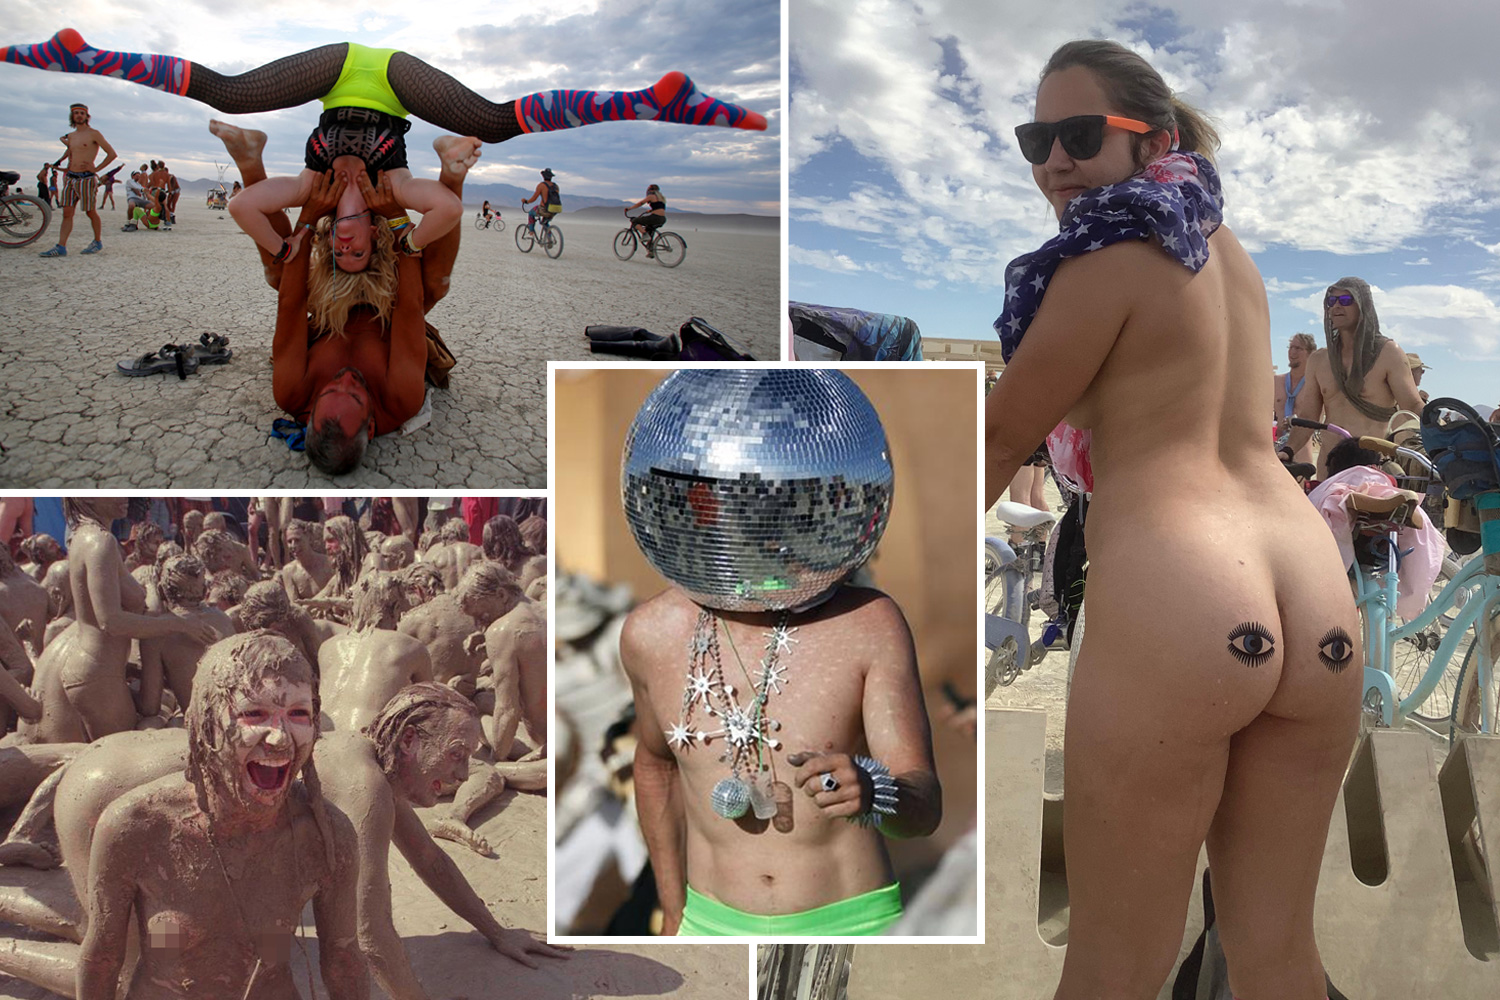 cynette nadunza recommends burning man 2017 nudity pic